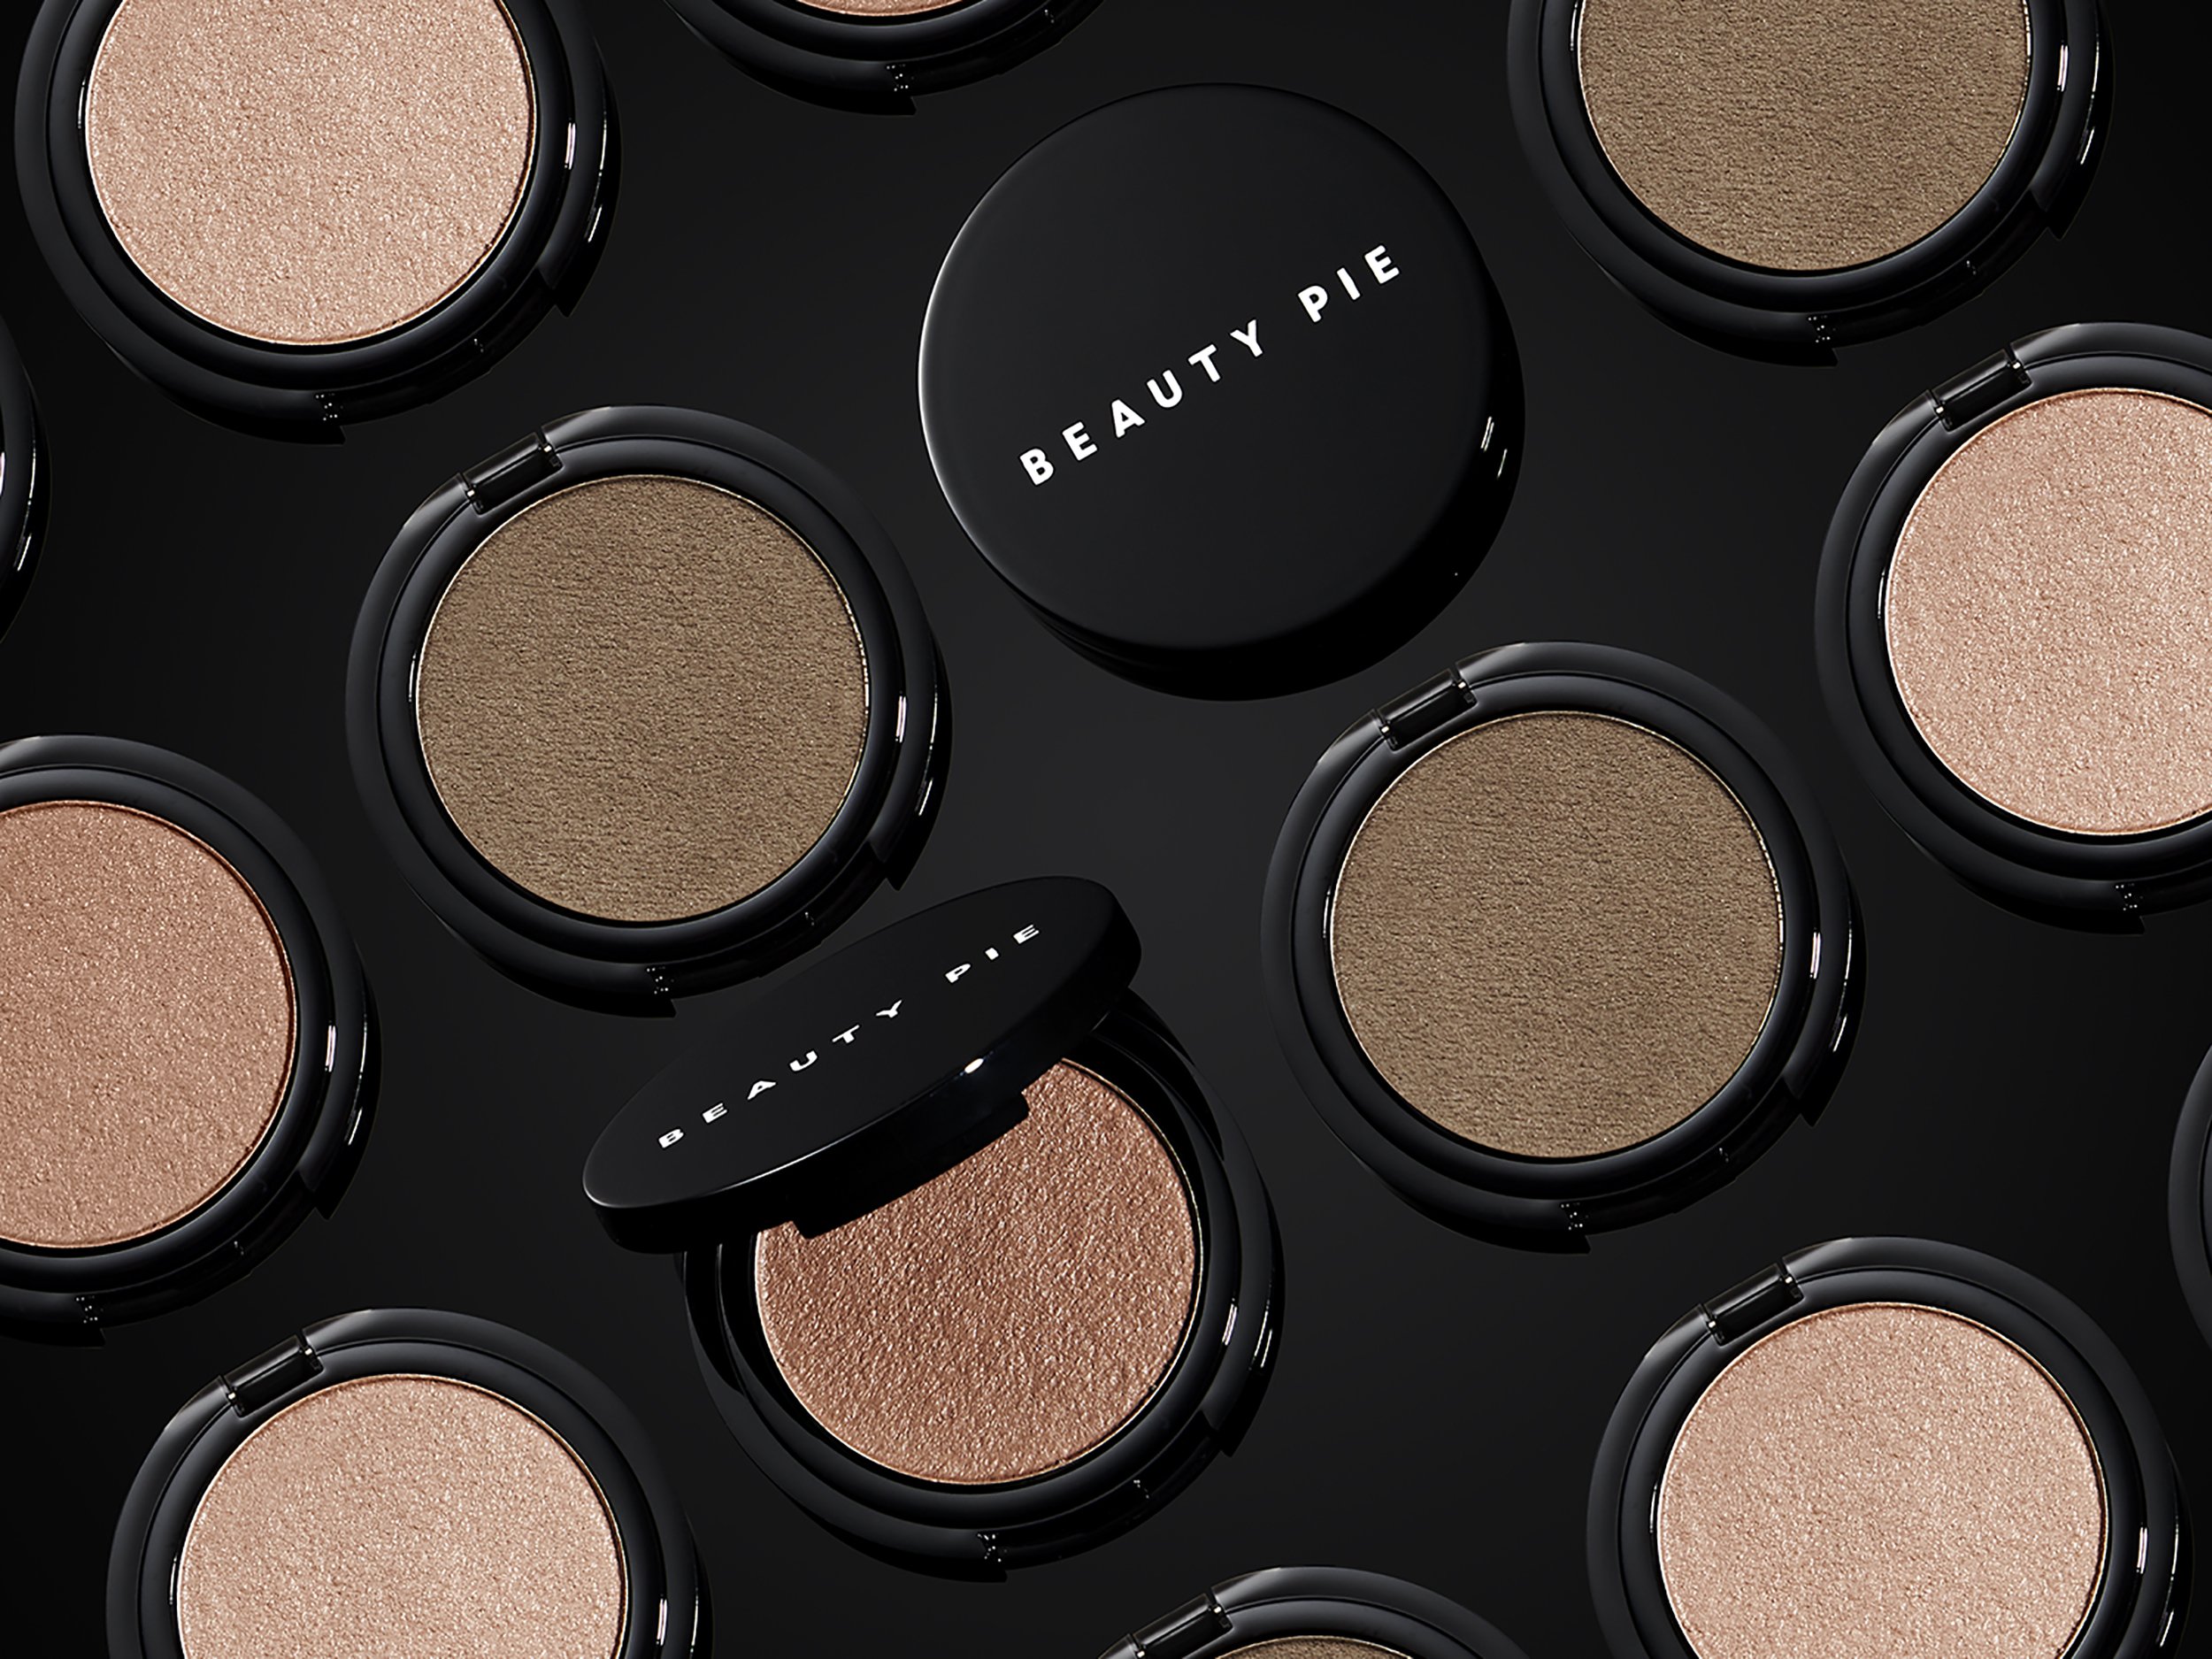 Beauty Pie eyeshadow make-up range - product photography by London-based Simon Lyle Ritchie